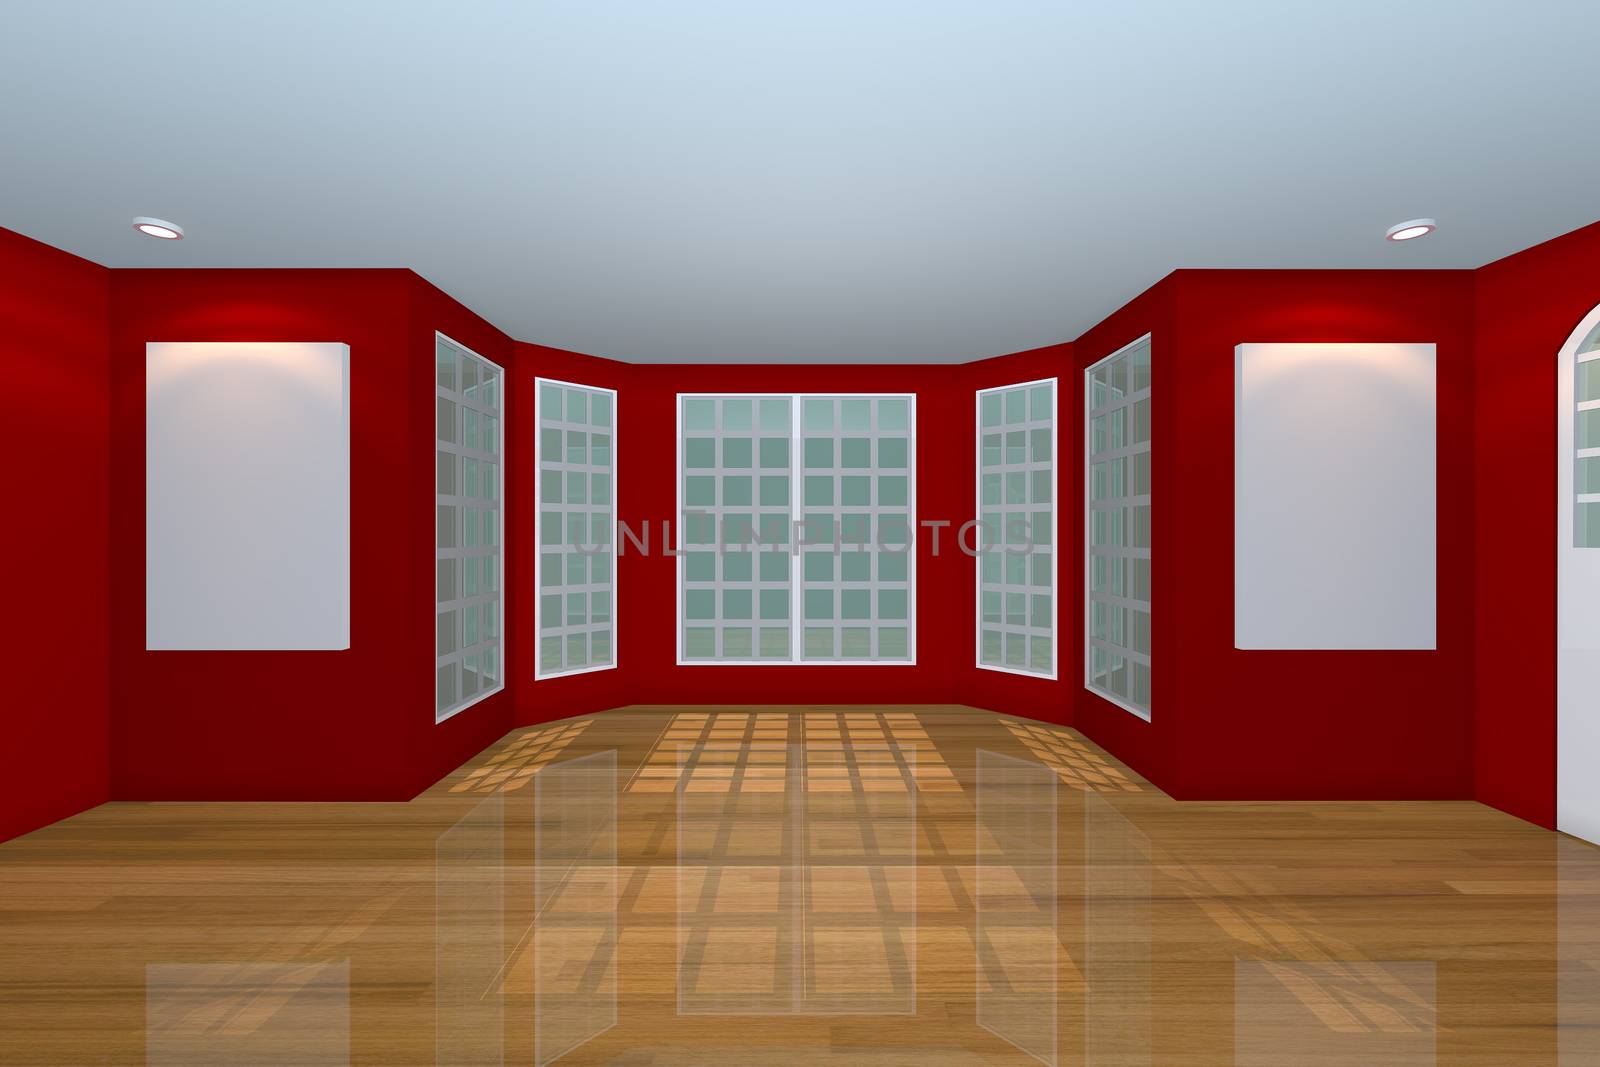 Home interior rendering with empty room color red wall and decorated with wooden floors. 